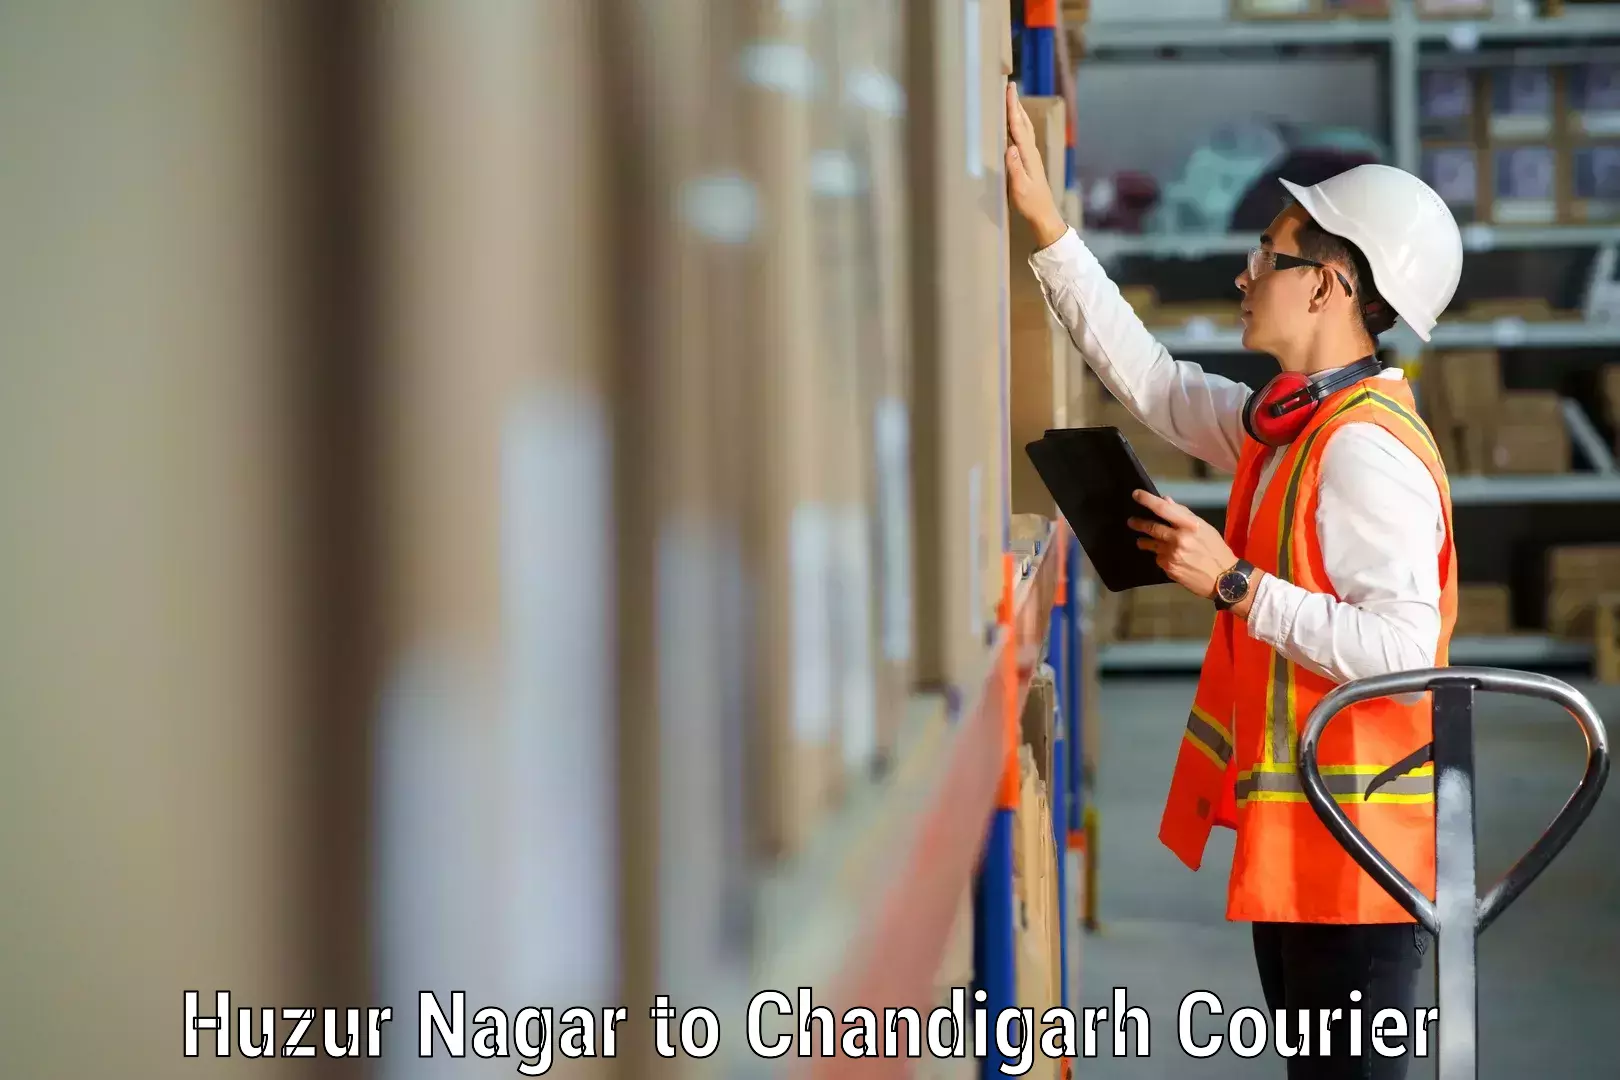 Trusted relocation experts Huzur Nagar to Chandigarh